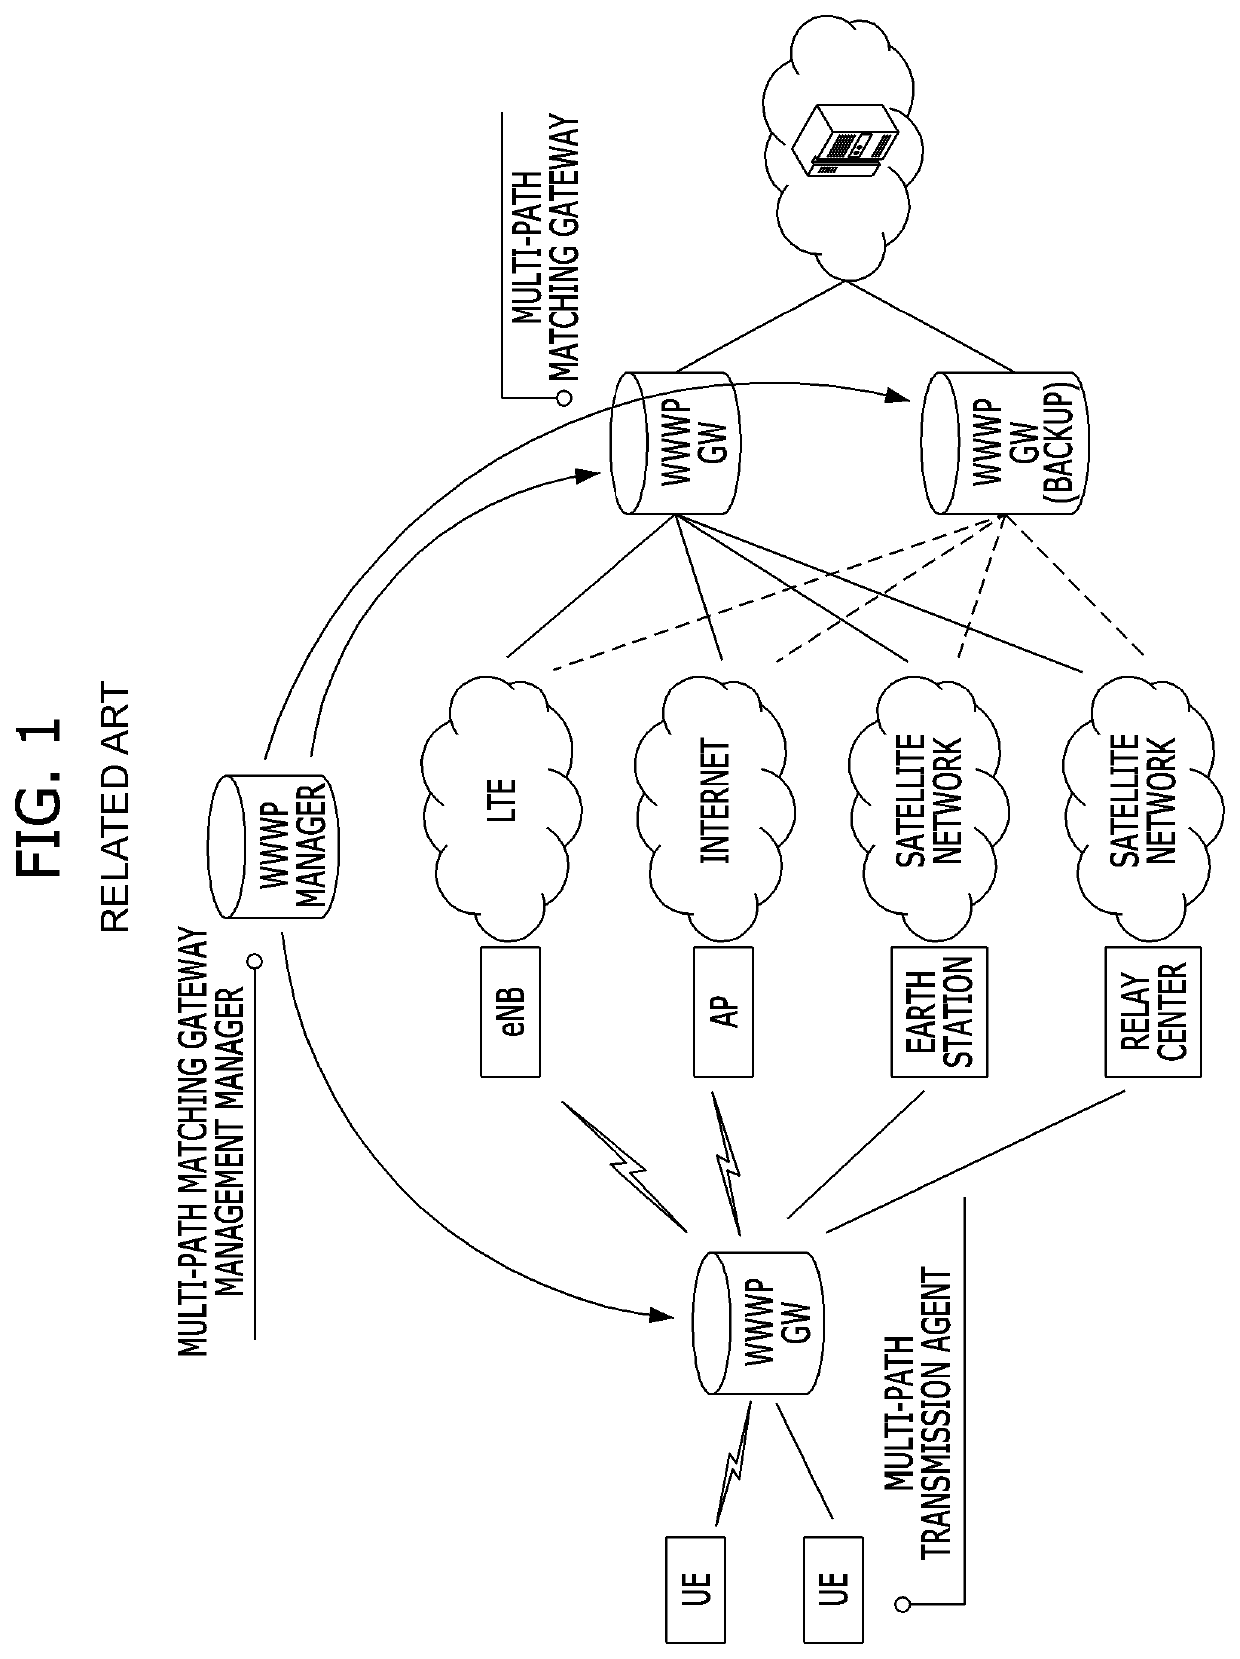 System and method for selecting optimal path in multi-media multi-path network